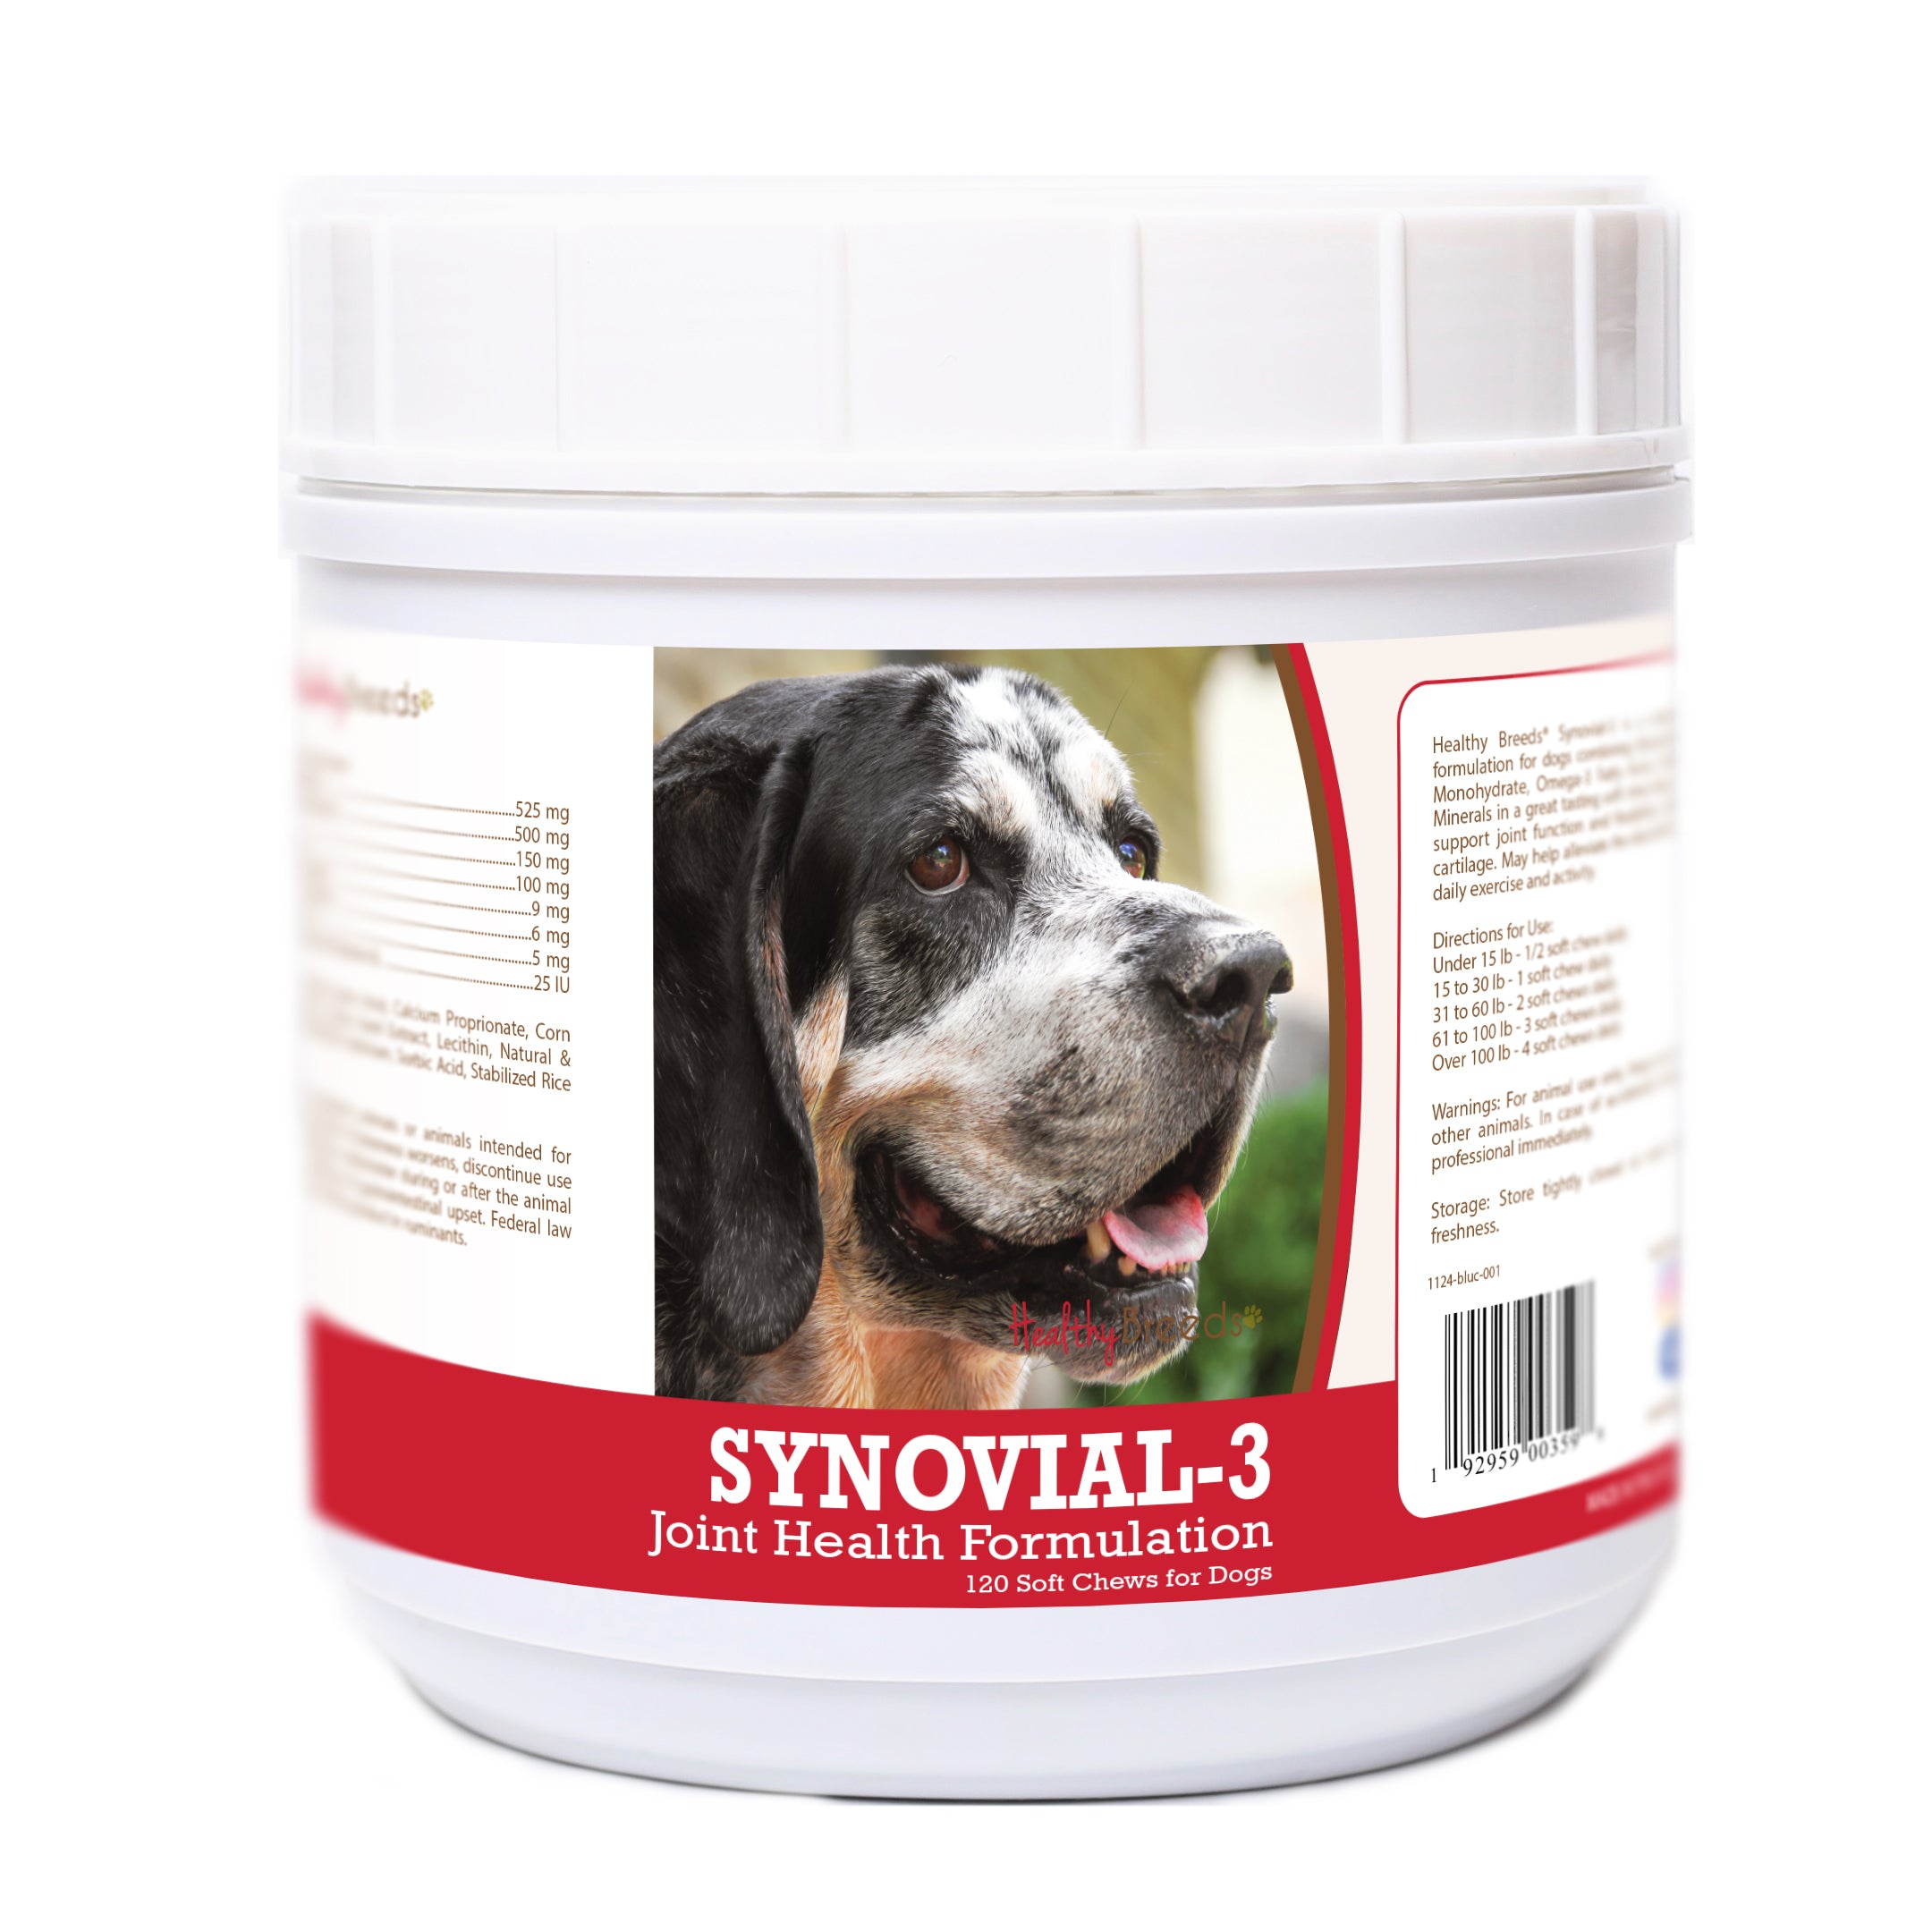 Bluetick Coonhound Synovial-3 Joint Health Formulation Soft Chews 120 Count